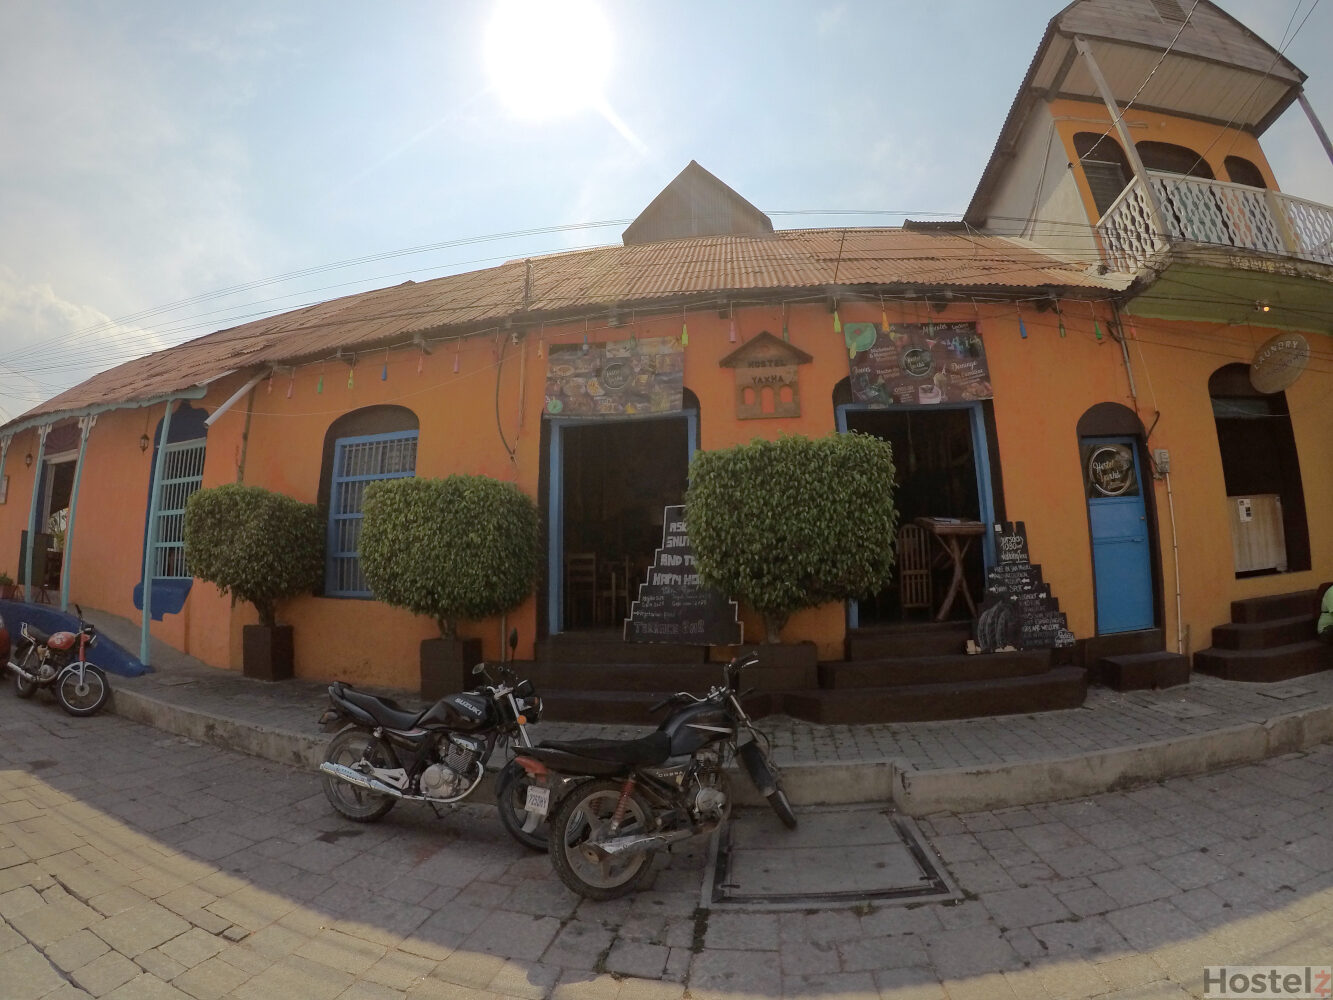 Streetview of the Yaxha Hostel. Bell near small blue door on right.